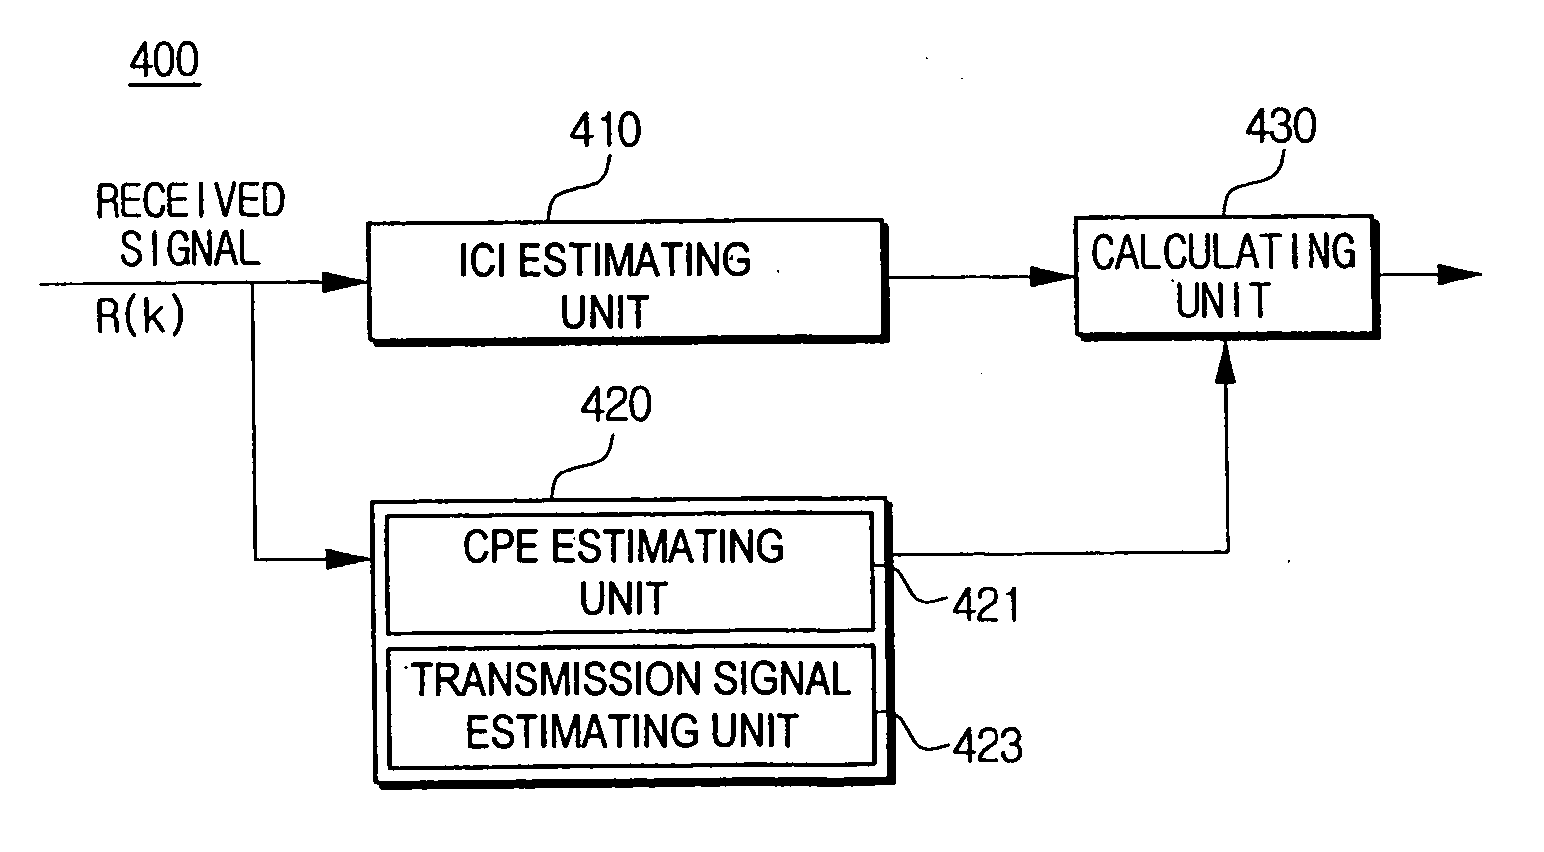 Phase noise compensation apparatus and an OFDM system having the apparatus and method thereof